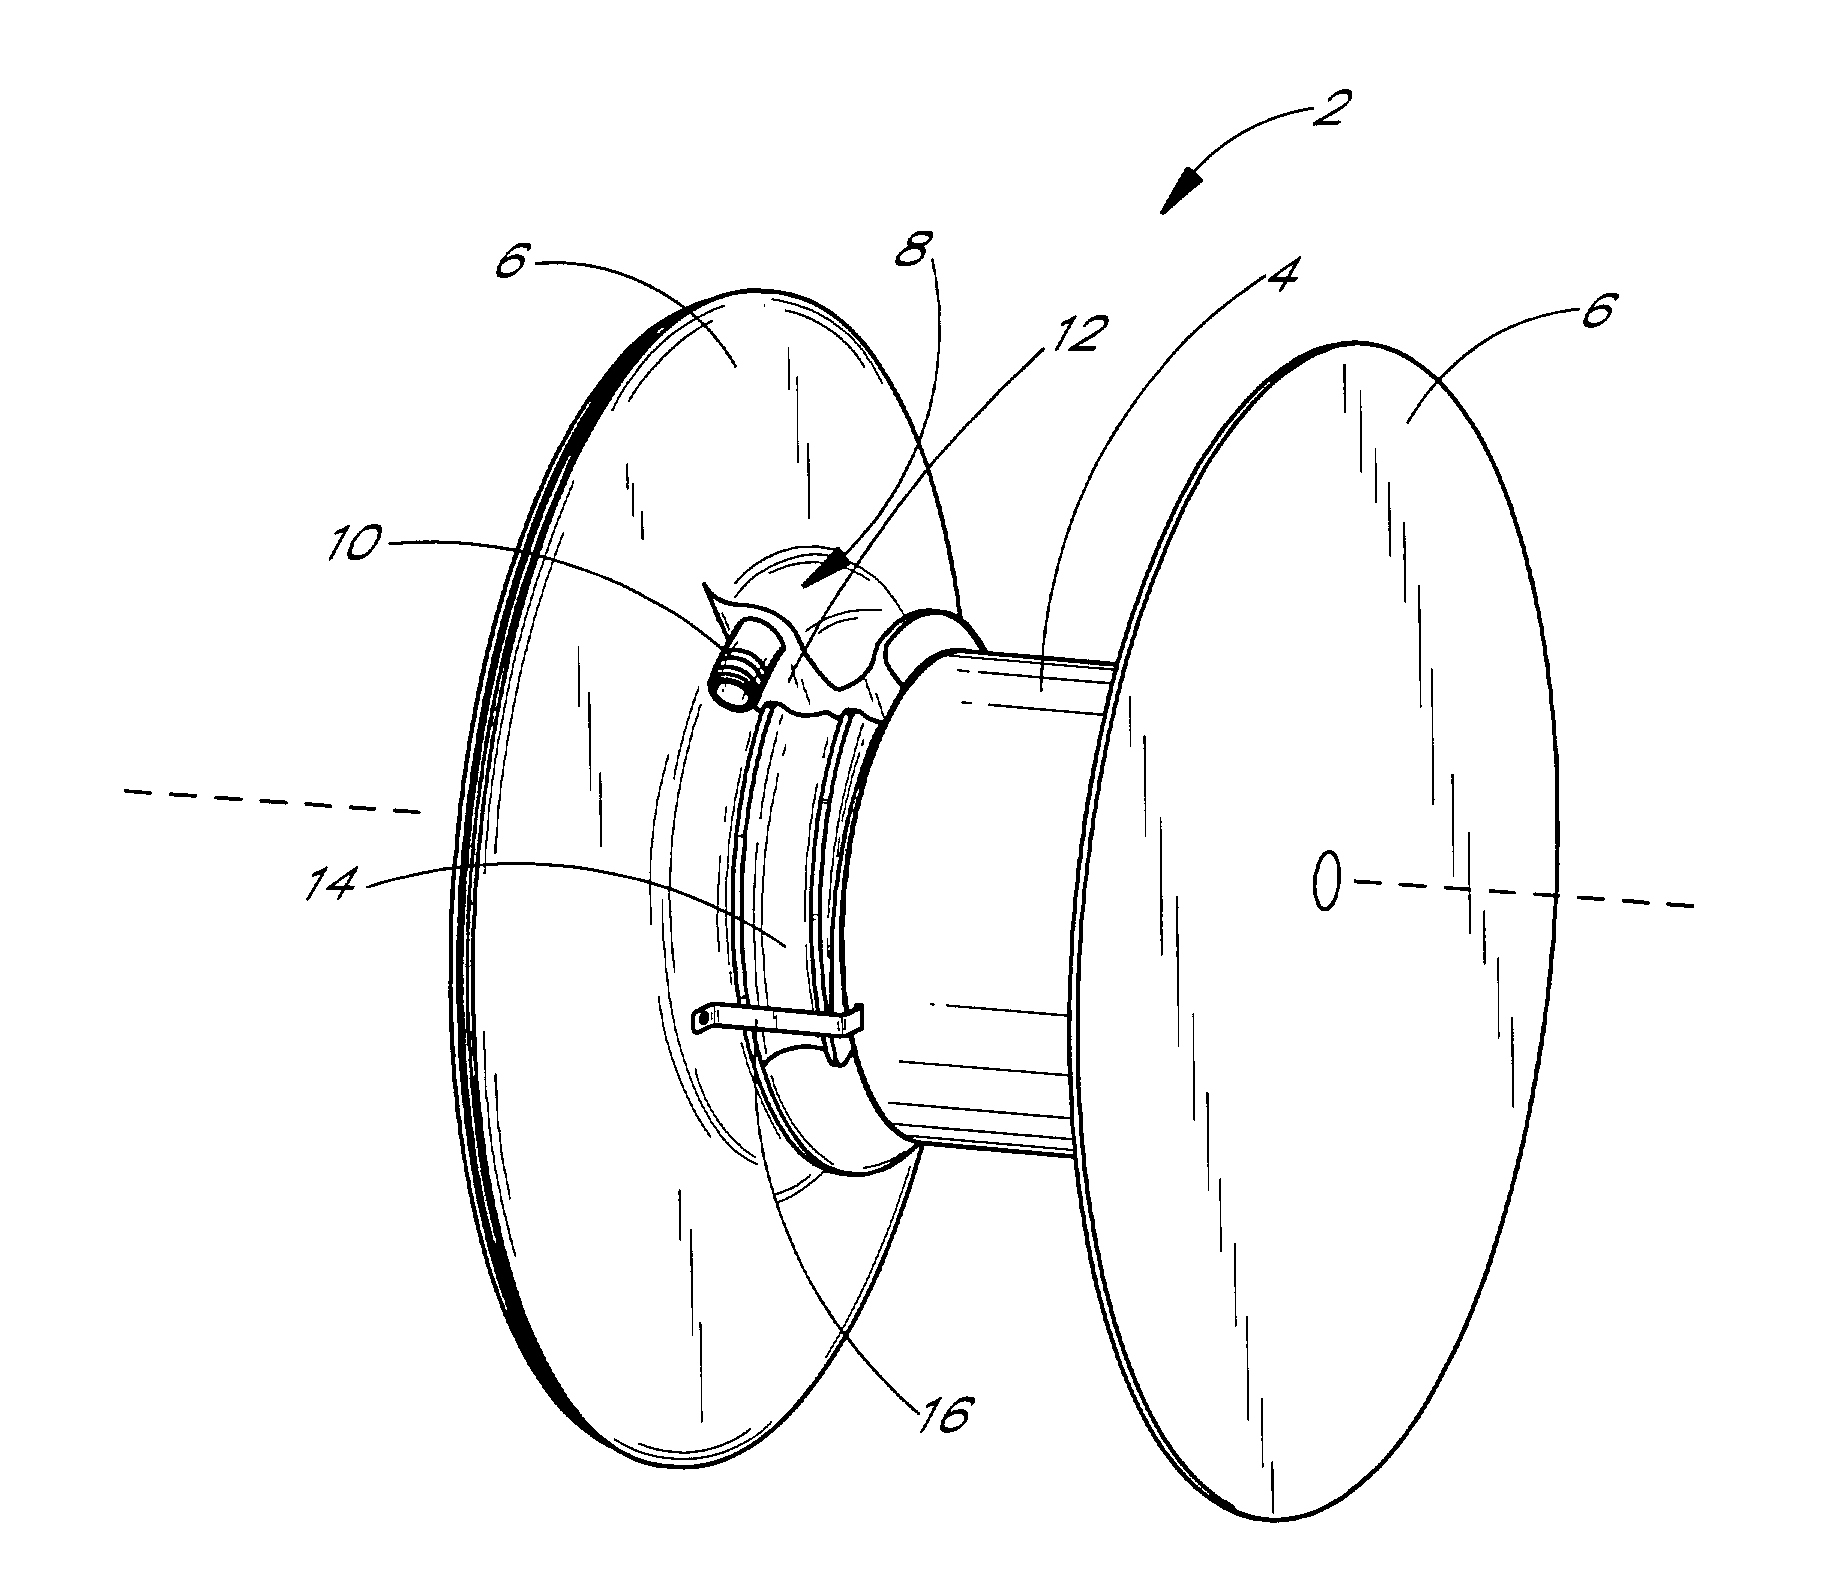 Reel having apparatus for improved connection of linear material